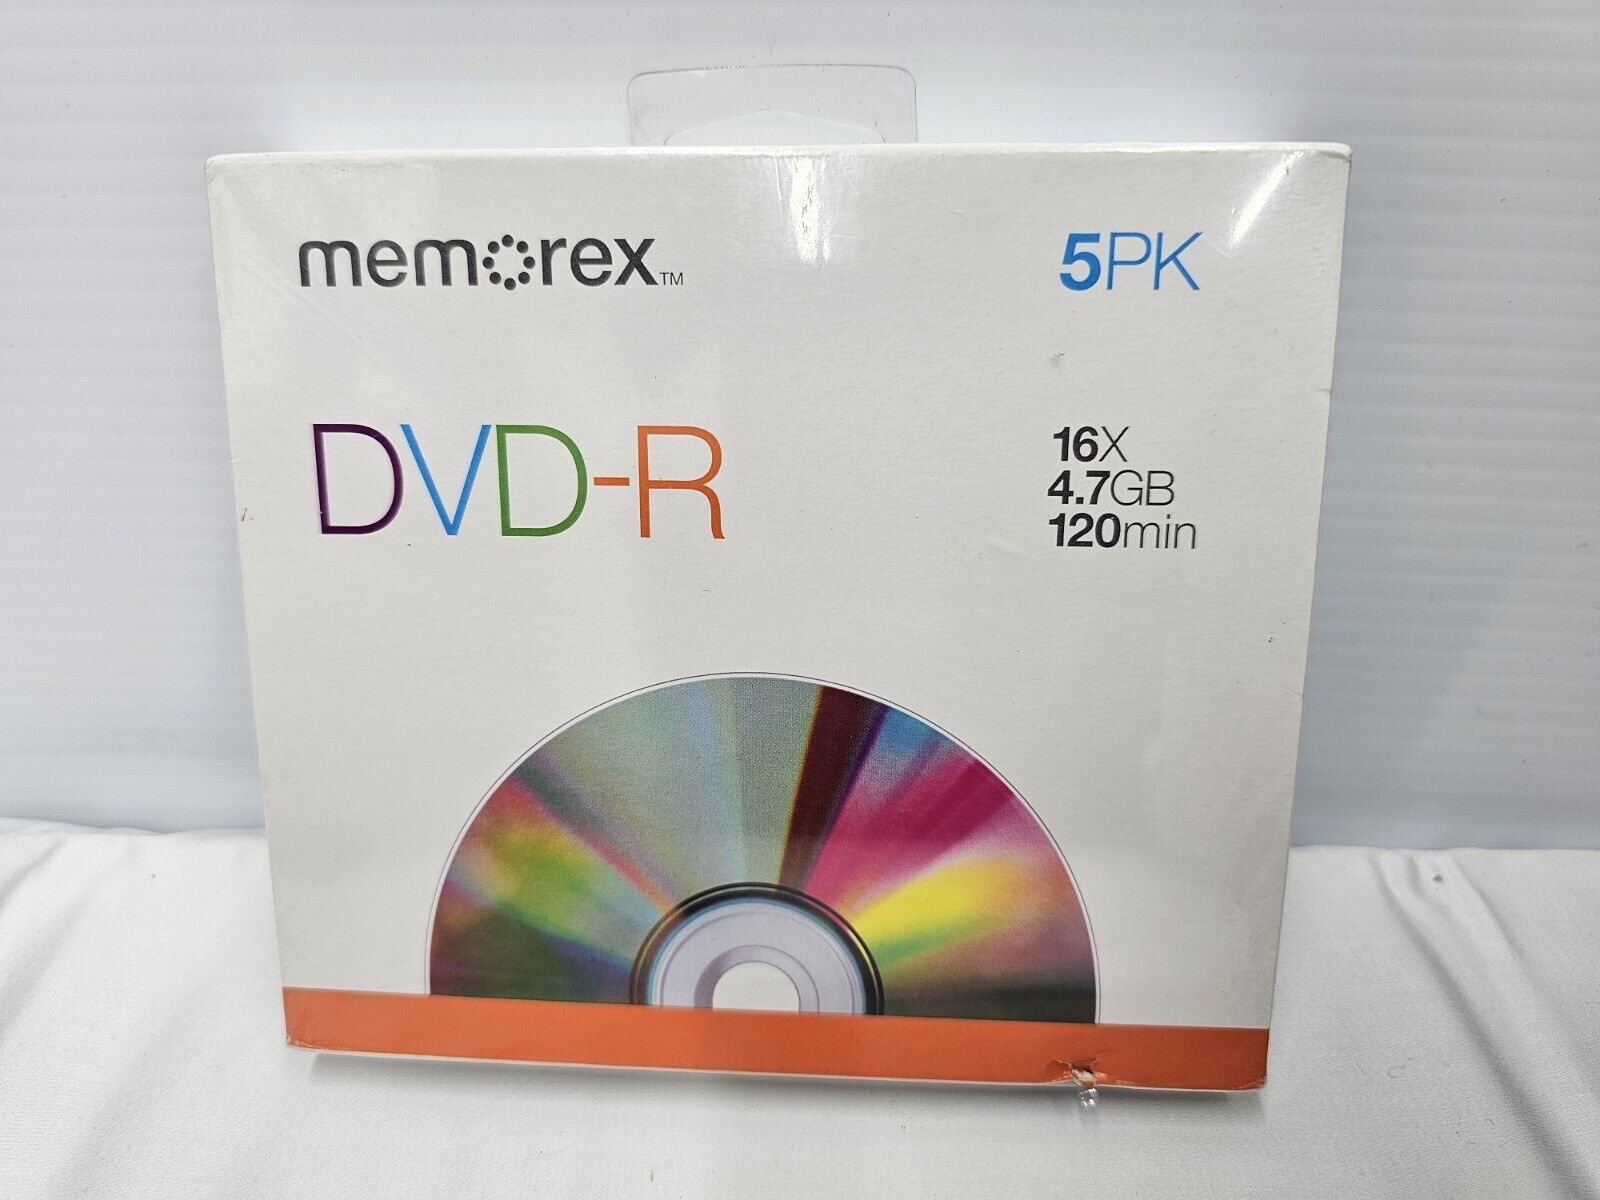 New Genuine Memorex DVD-R Blank Recordable Discs 16X 4.7GB 120Min 5-Pack w/cases